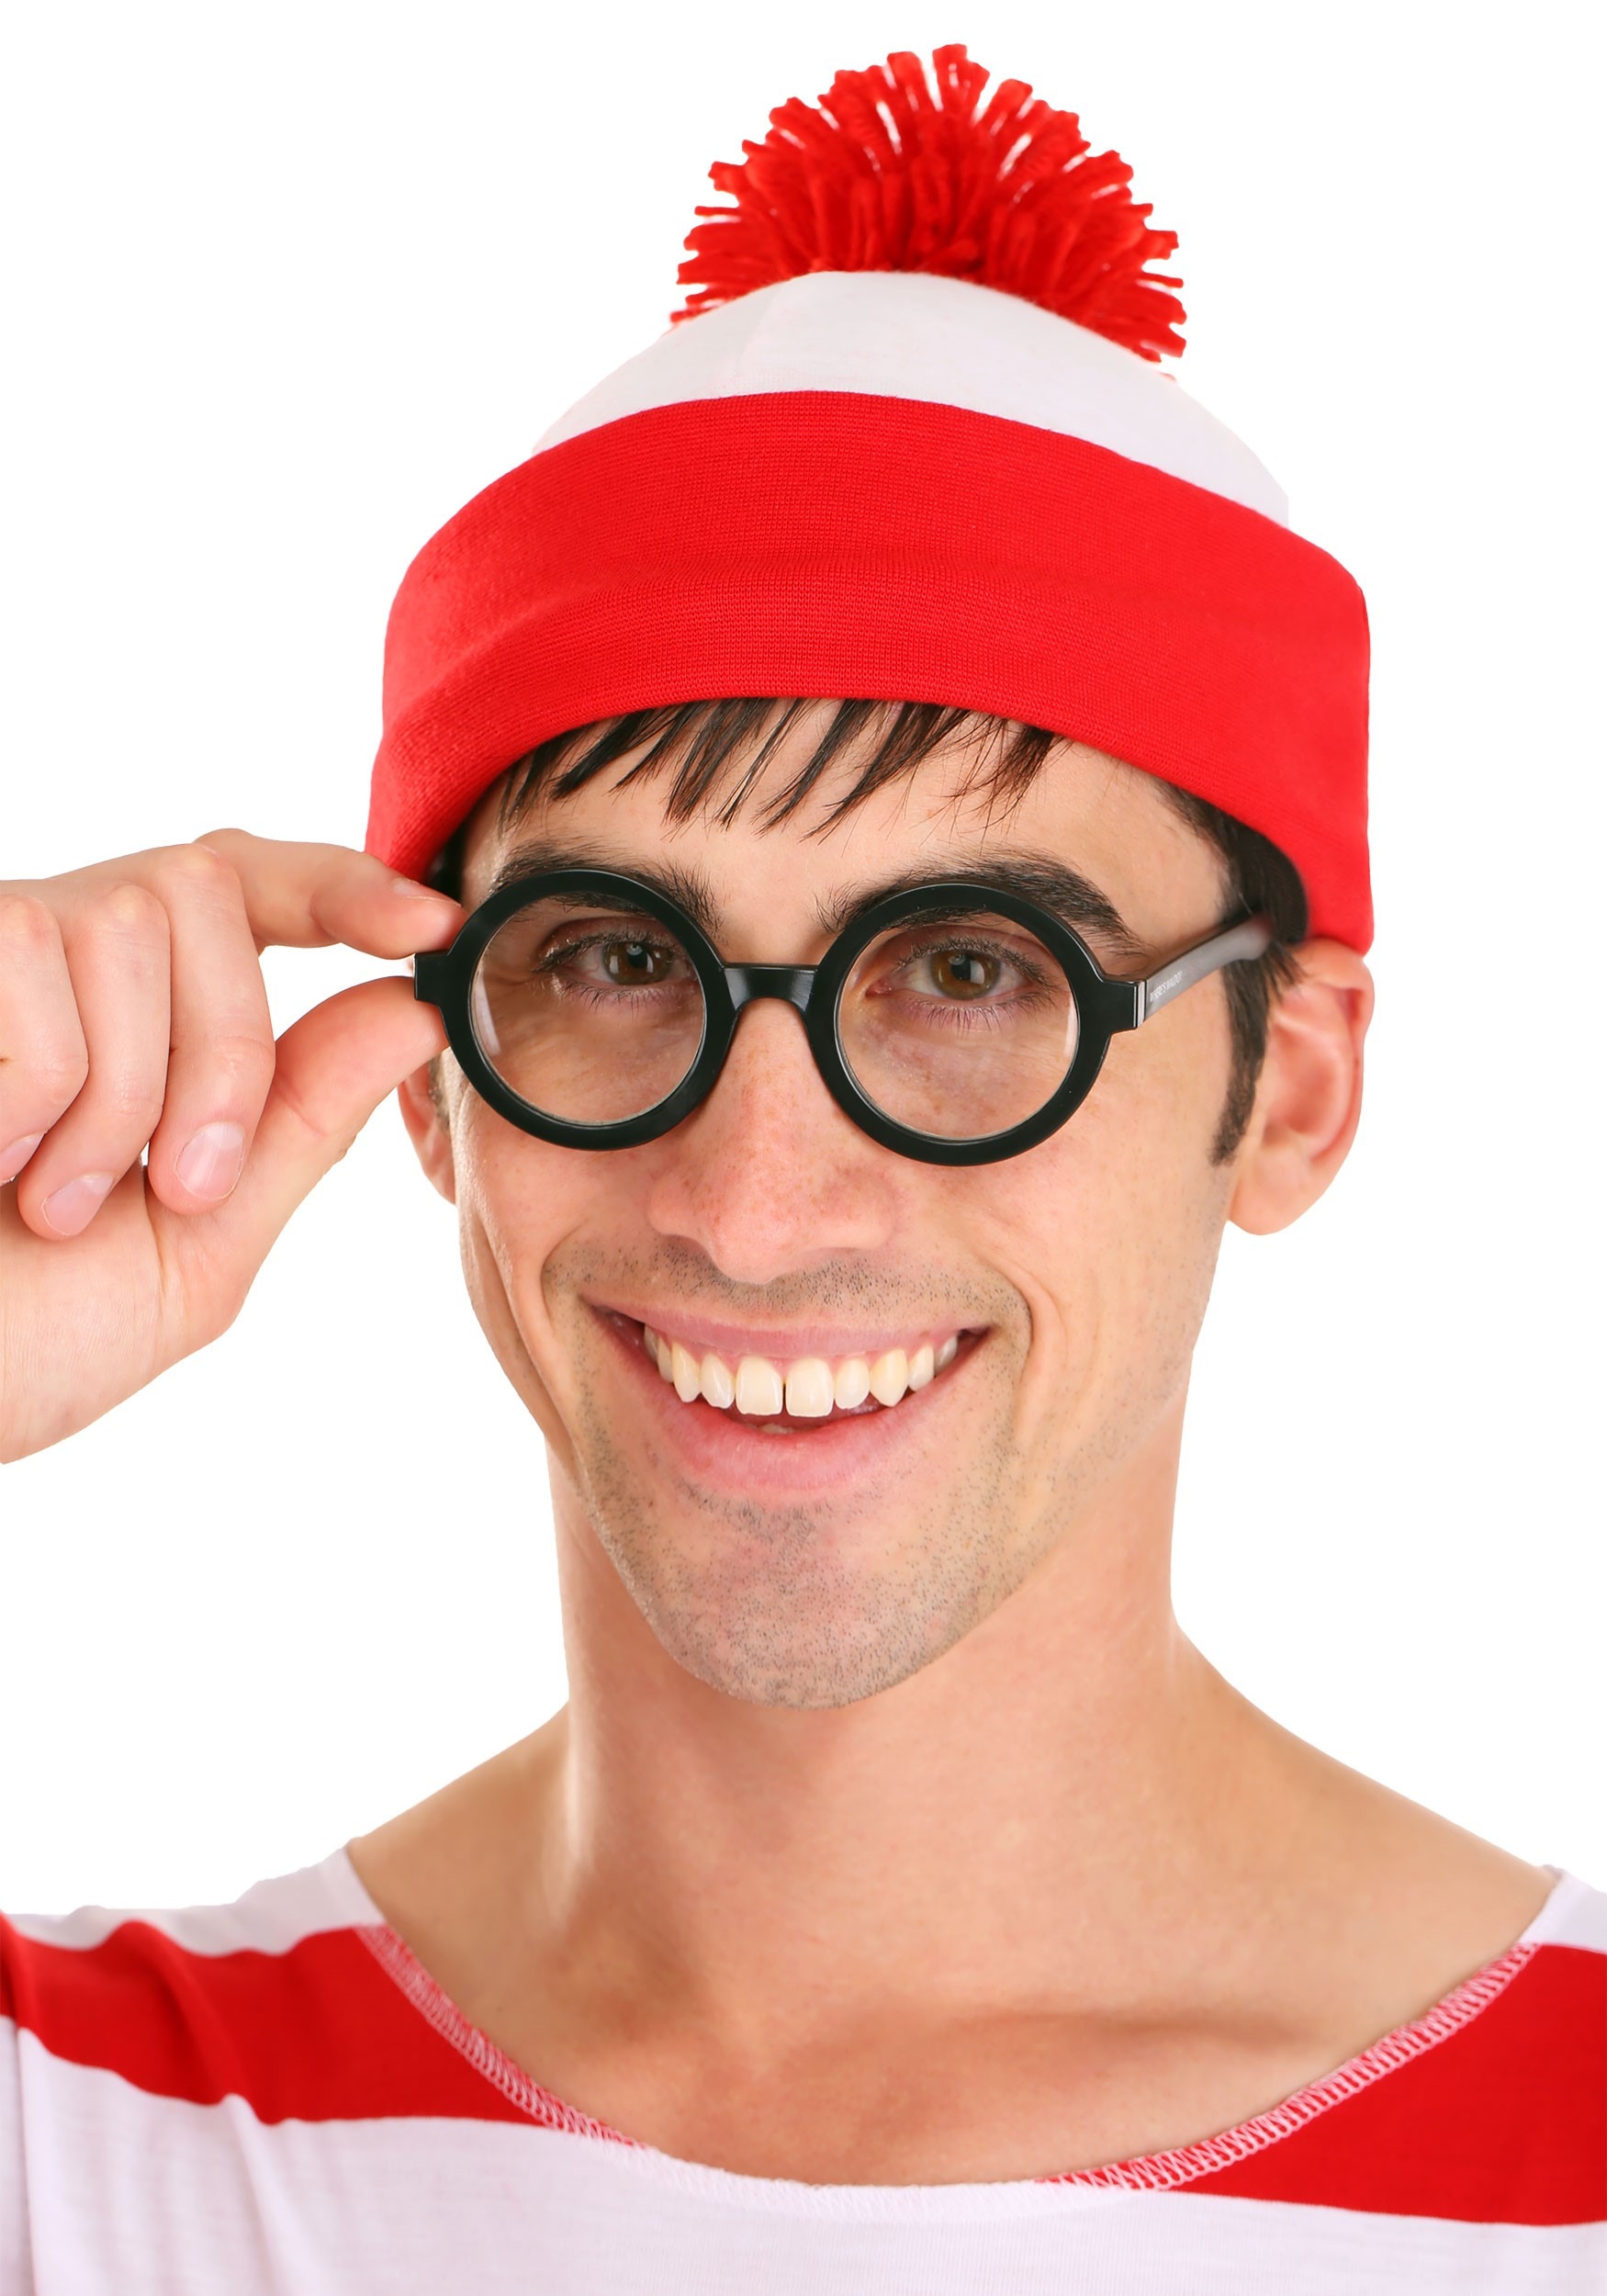 Where’s Waldo Fancy Dress Costume , Exclusive Sizes Available